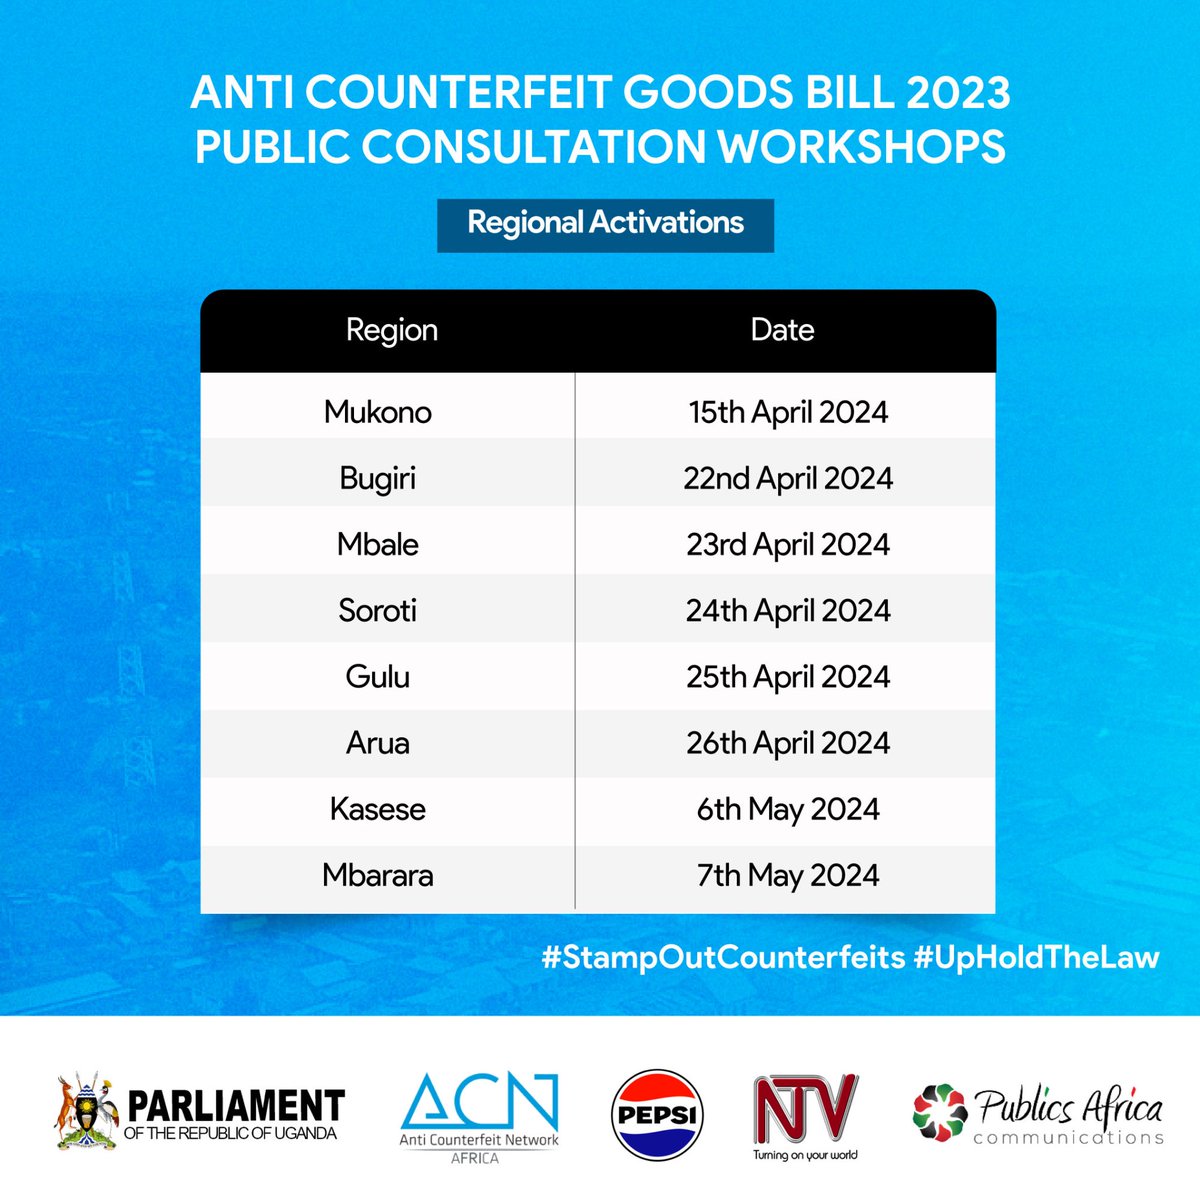 Don’t be negligent ❗️ Don’t condone ❗️ Report Counterfeits ❗️ ✅ Mukono ✅ Bugiri ✅ Mbale 📍 Soroti #StampOutCounterfeits #UpHoldTheLaw